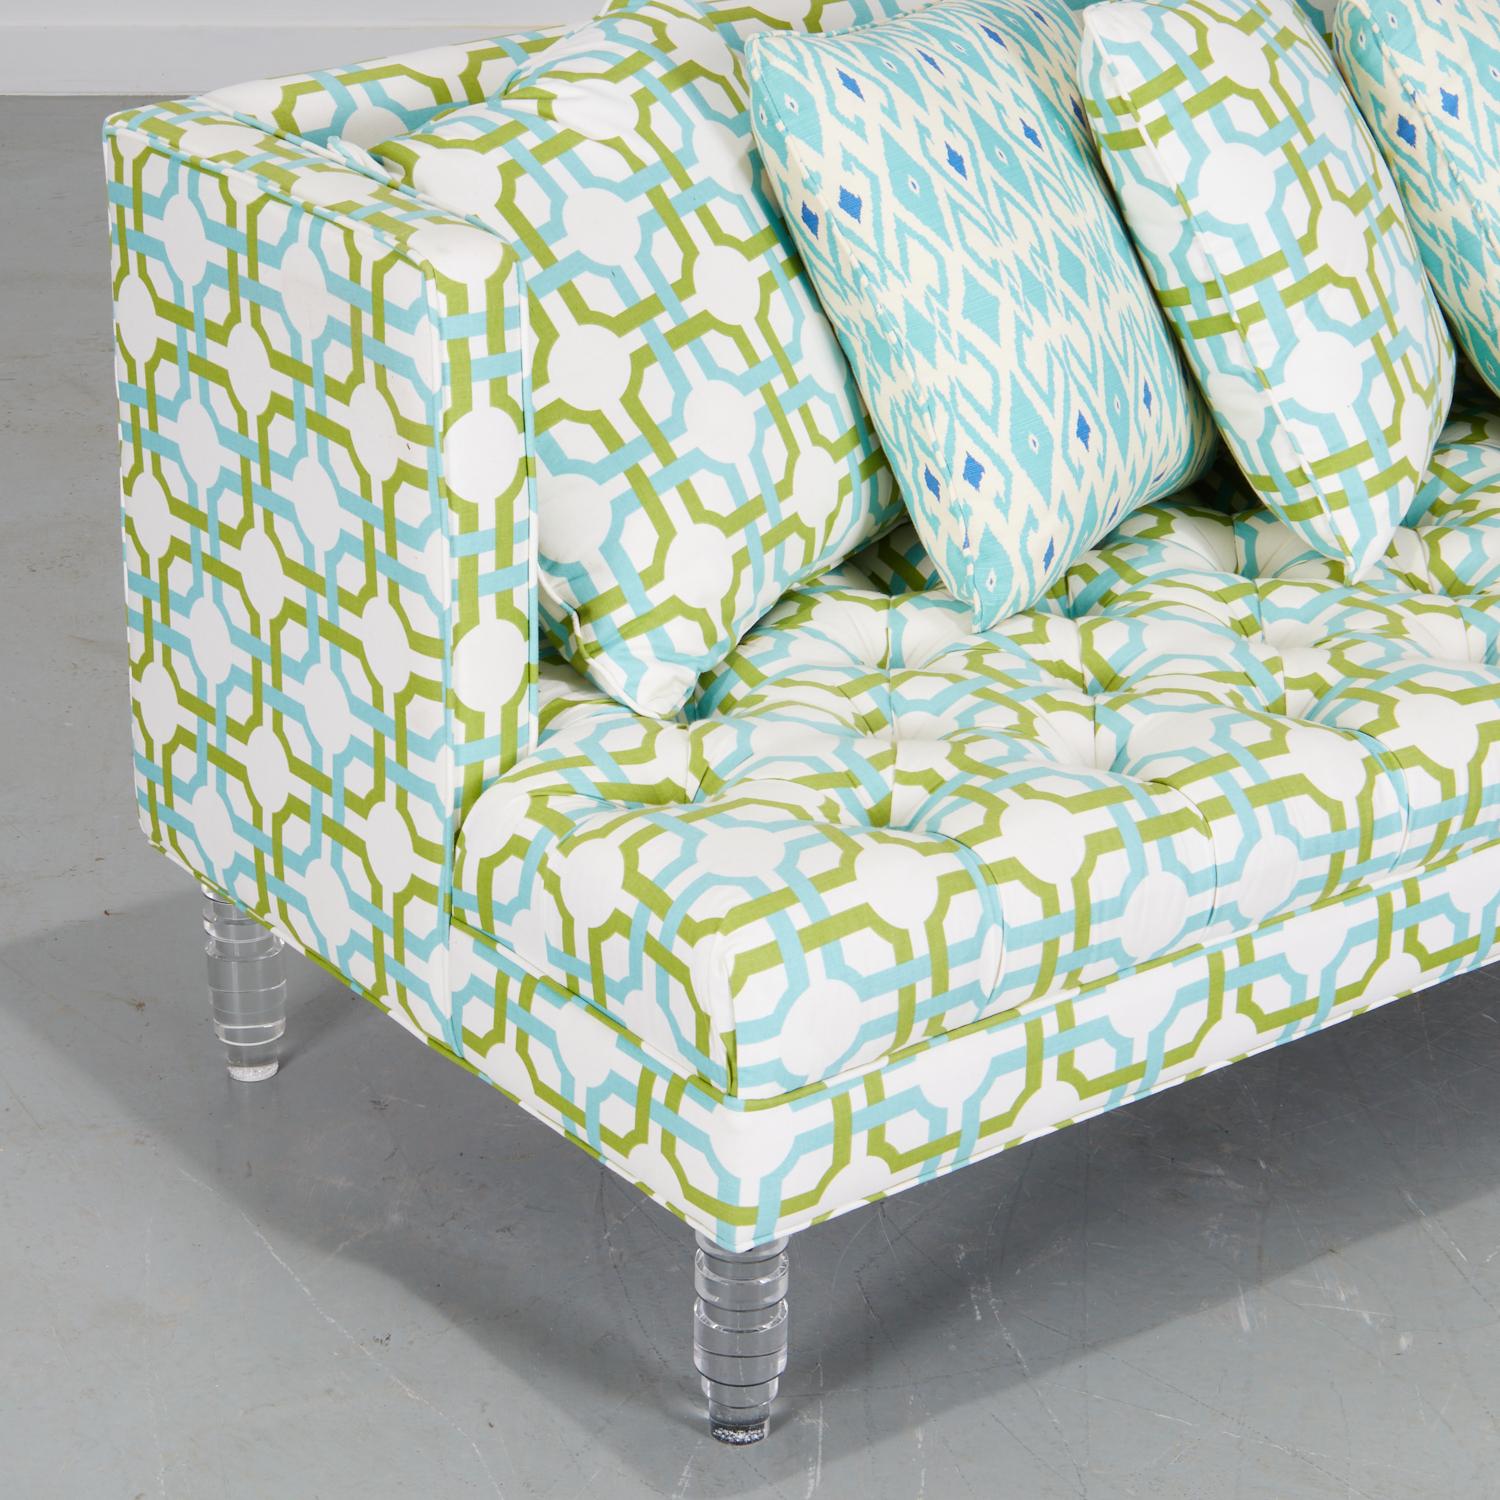 North American Contemporary Designer Acrylic Leg Settee with Button Tufted Seat and Tight Back